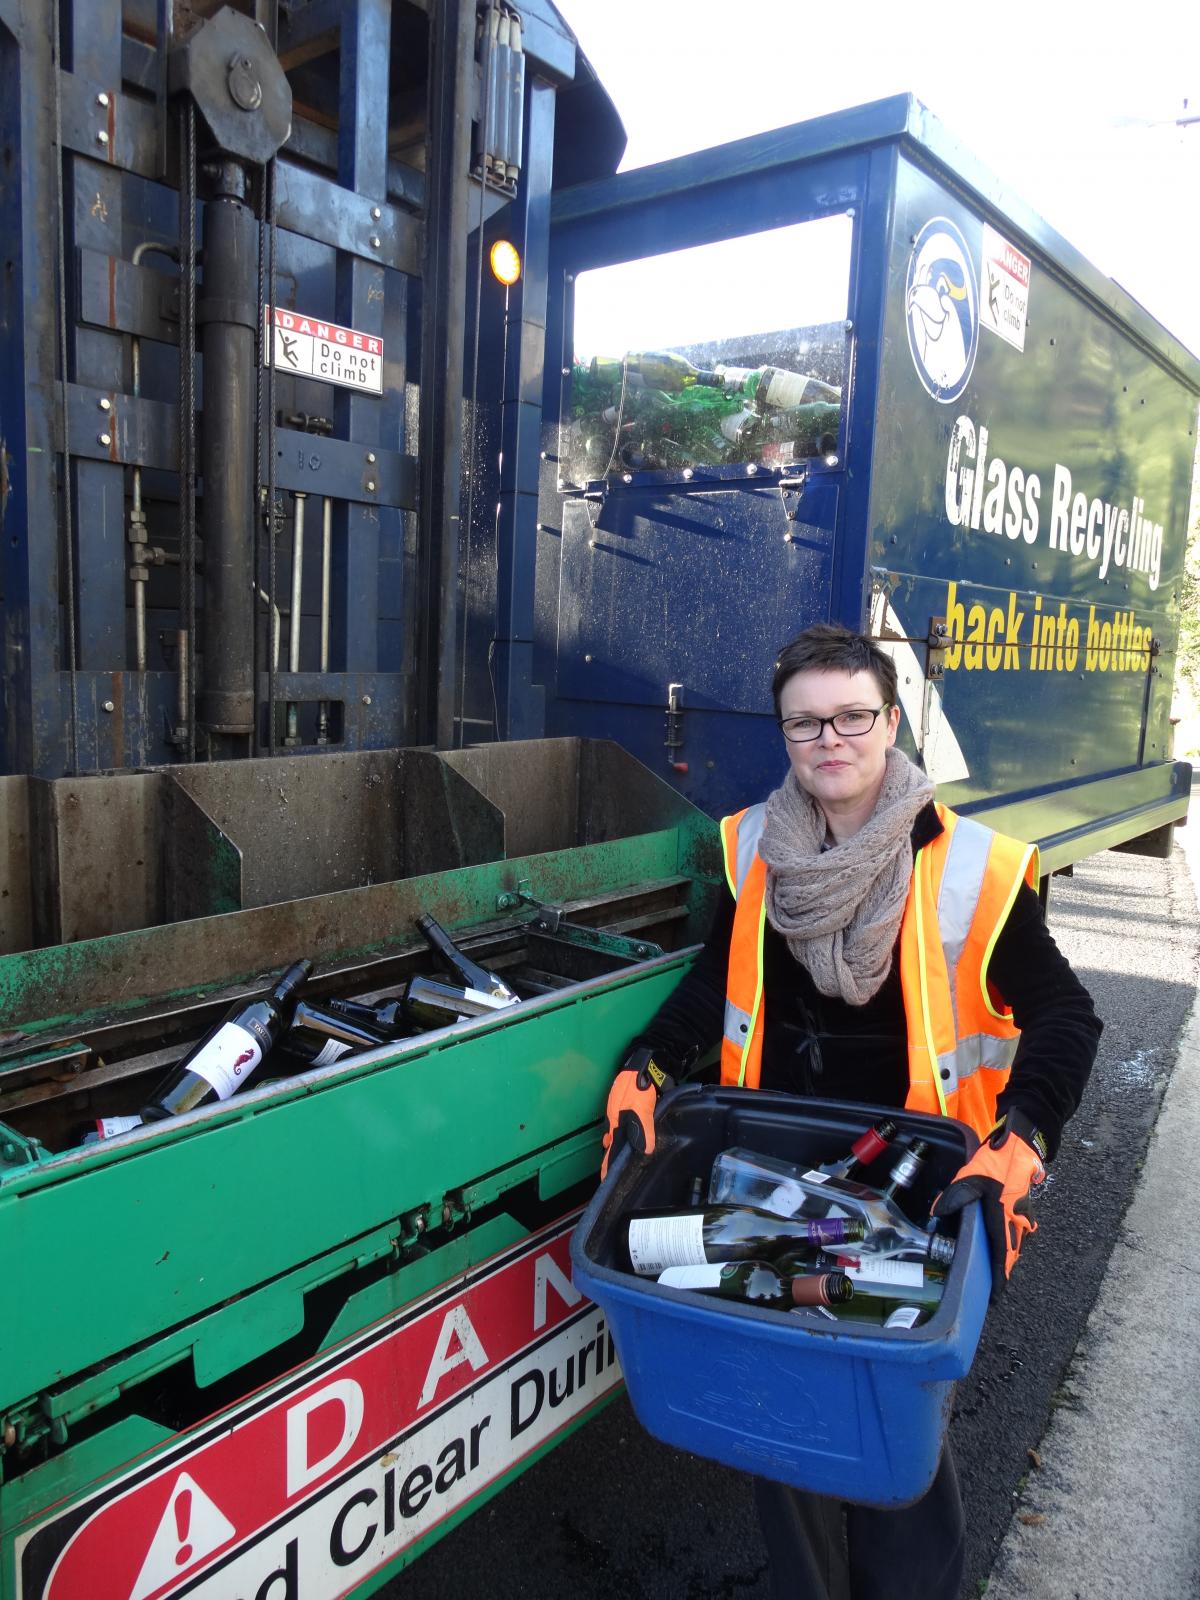 Dunedin leads in glass recycling | Otago Daily Times Online News